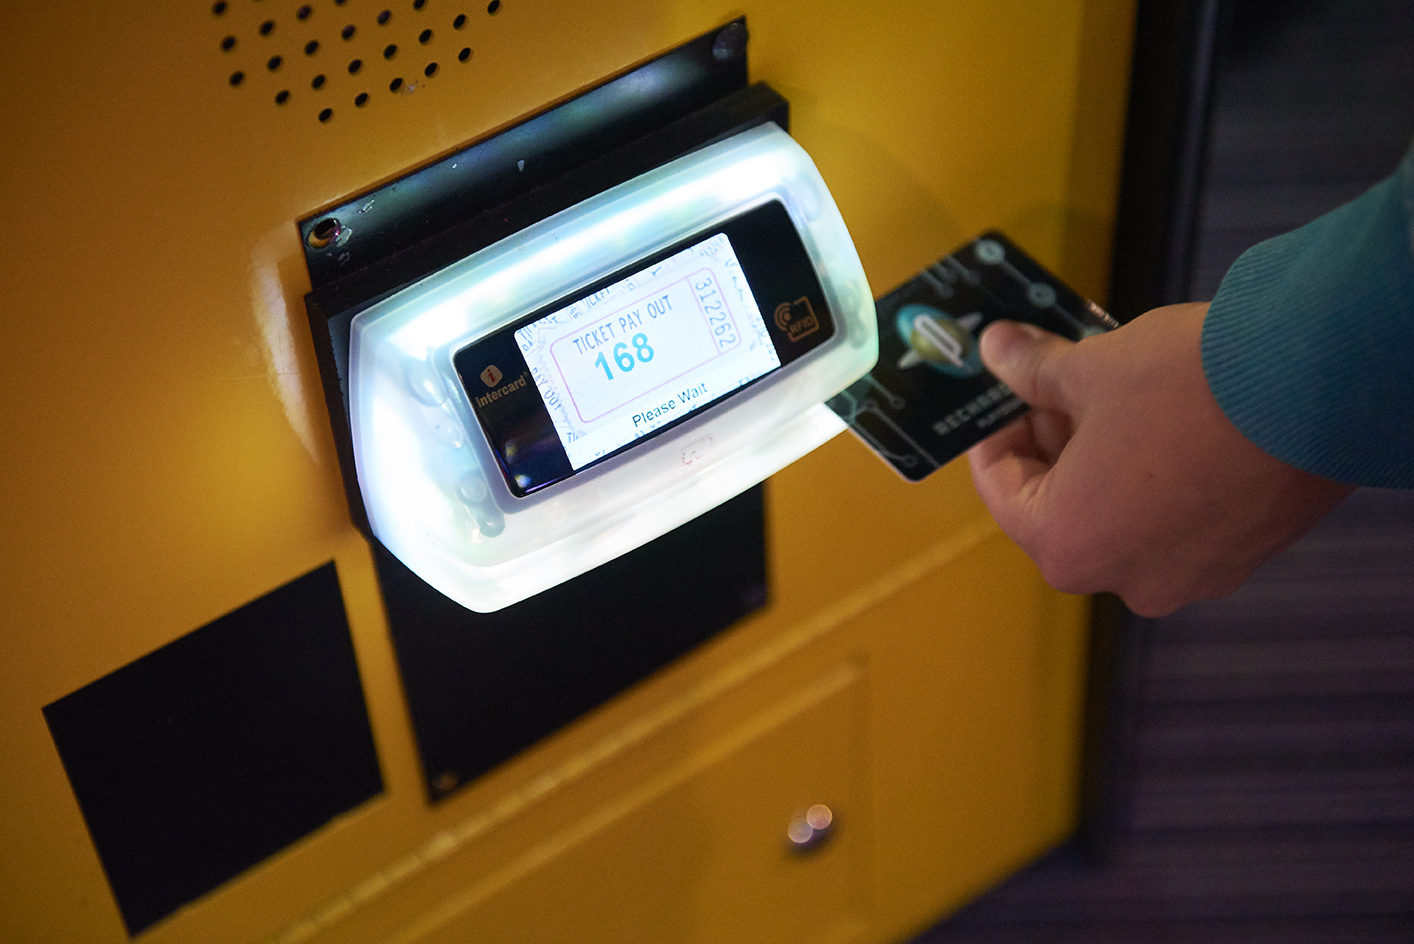 Photo of a arcade playcard being swiped on a game